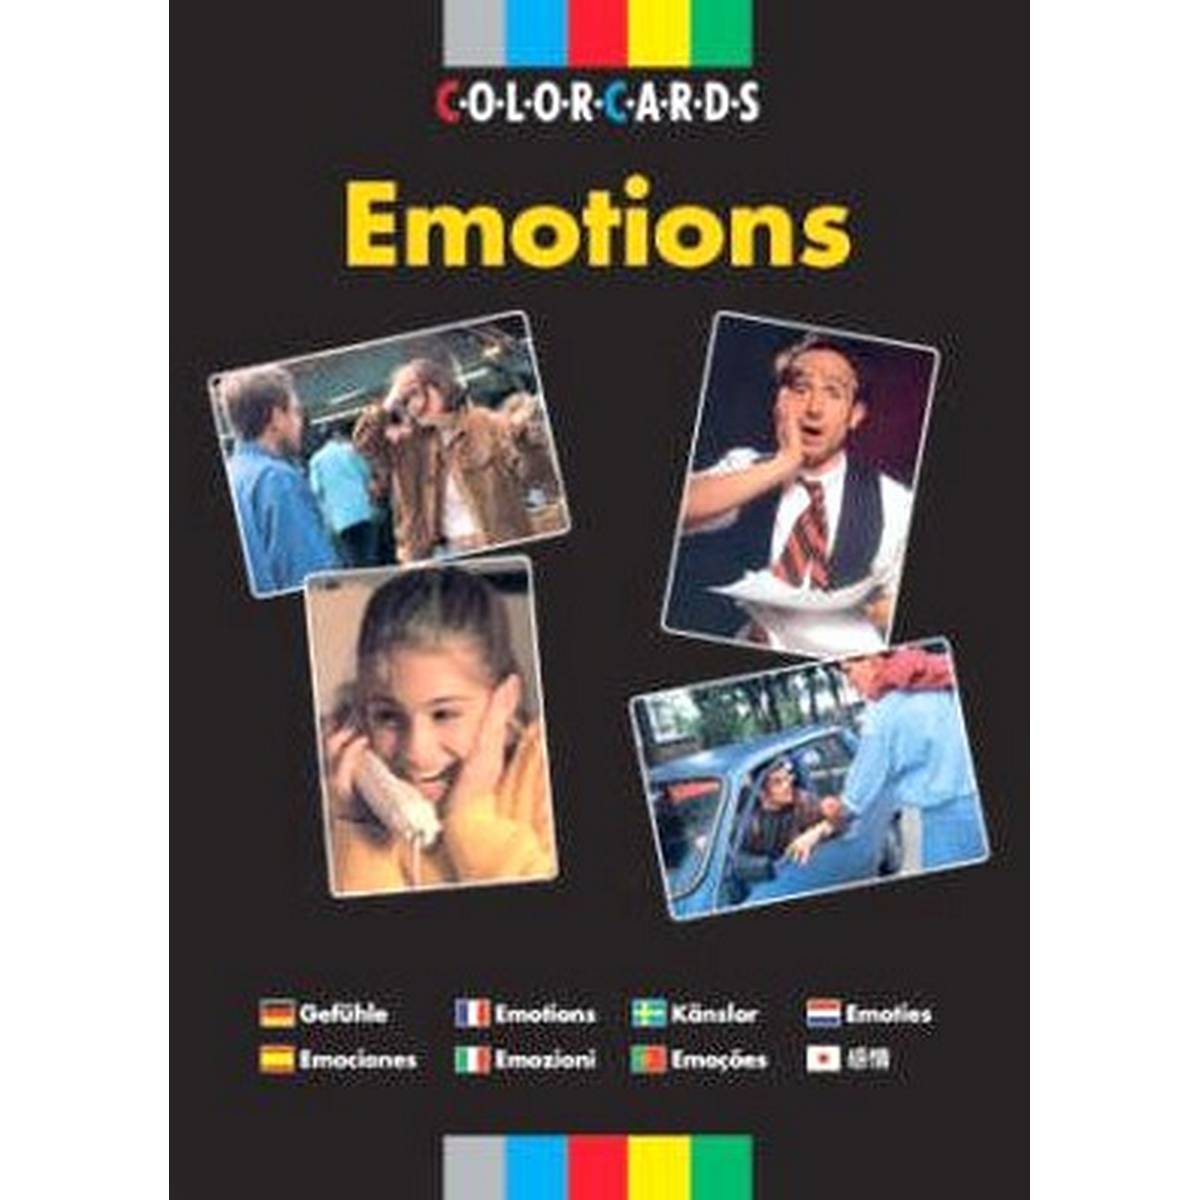 ColorCards: Emotions